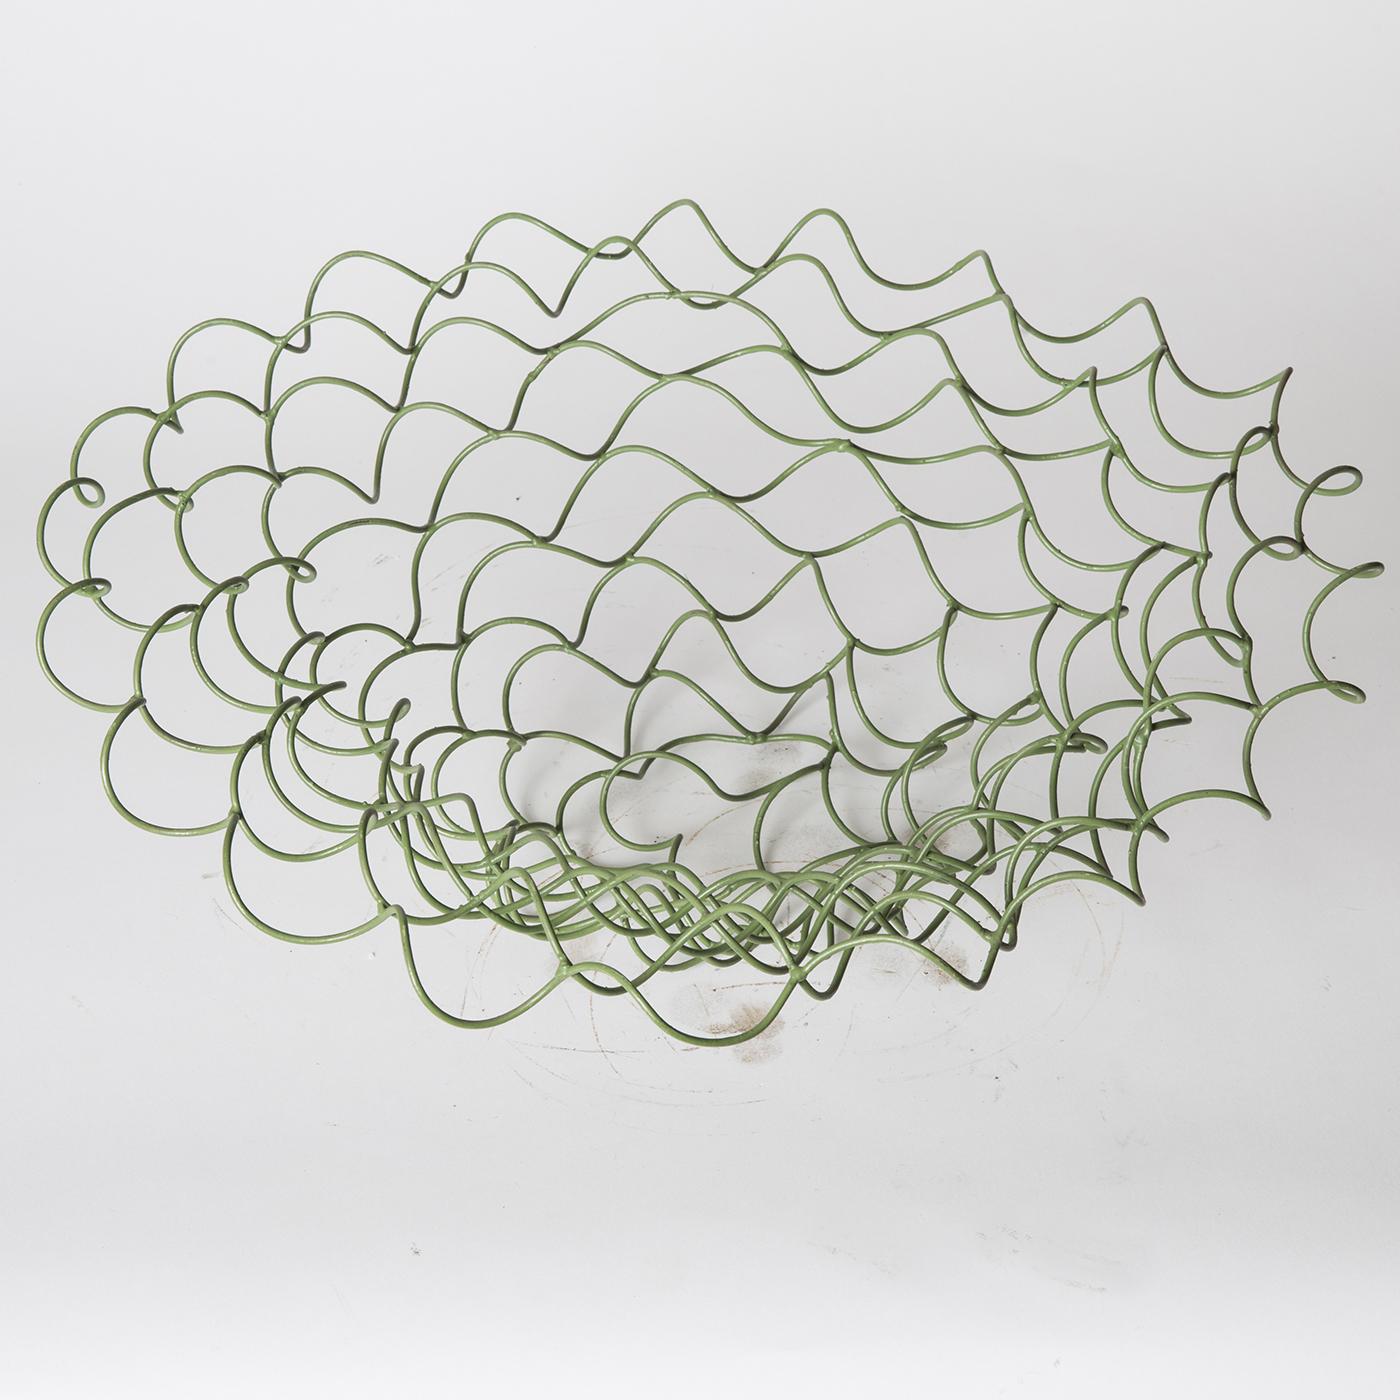 This sculptural vase by Sciortino is formed of tempered iron wire with a painted finish of various shades of green, lending the unruly geometry of the piece a distinct vivacity. Product dimensions may vary slightly. 



  